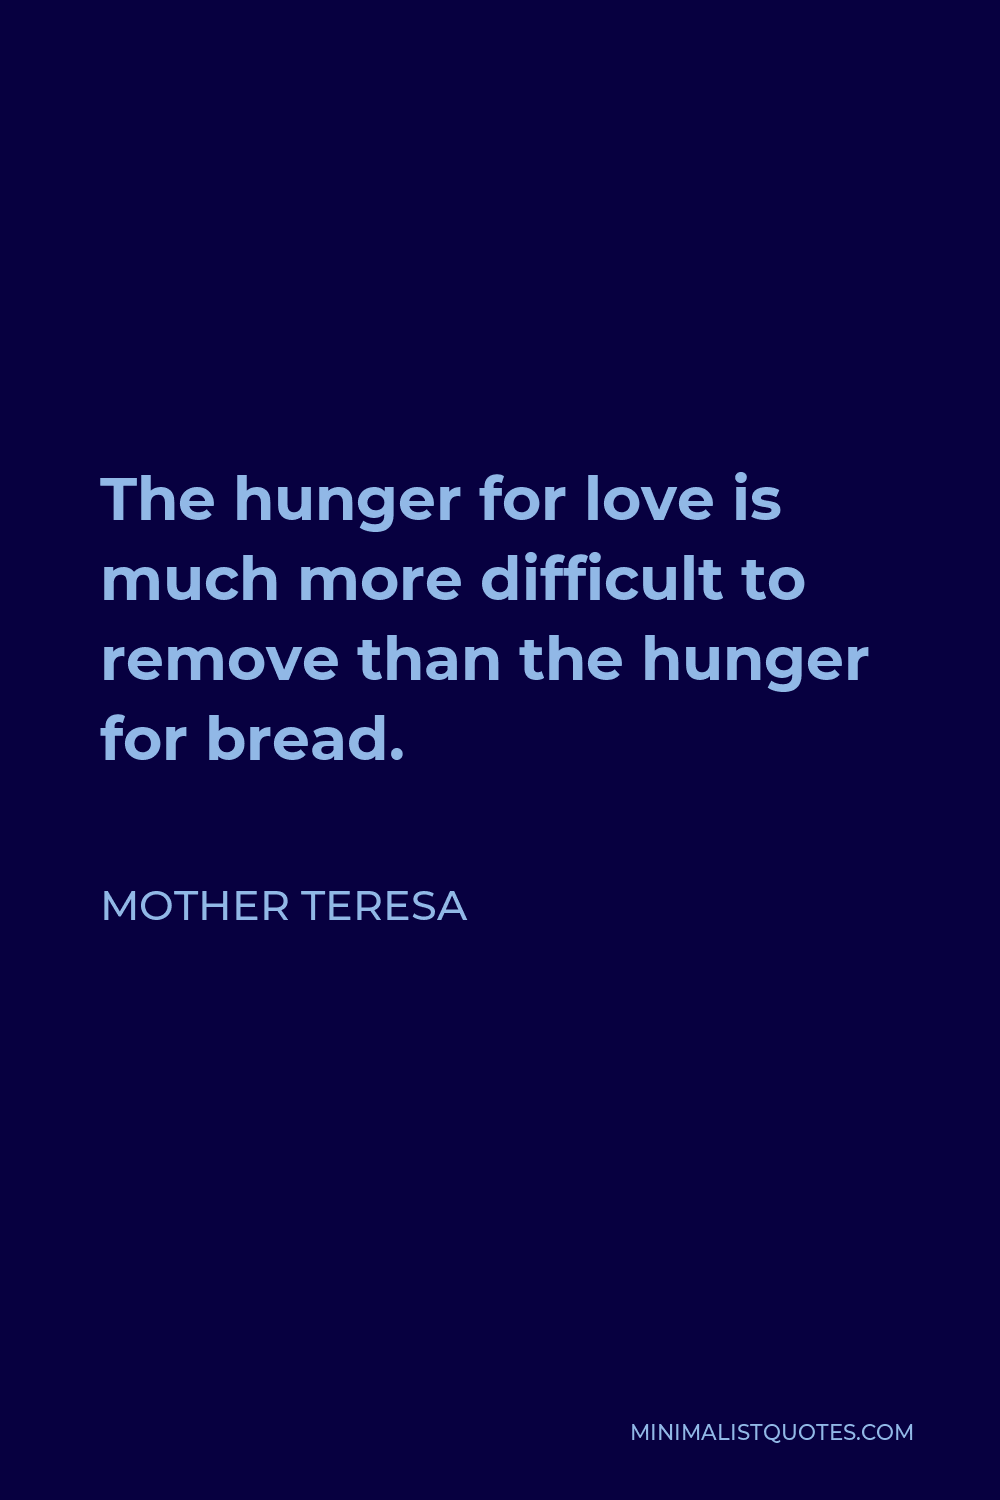 Mother Teresa Quote - The hunger for love is much more difficult to remove than the hunger for bread.